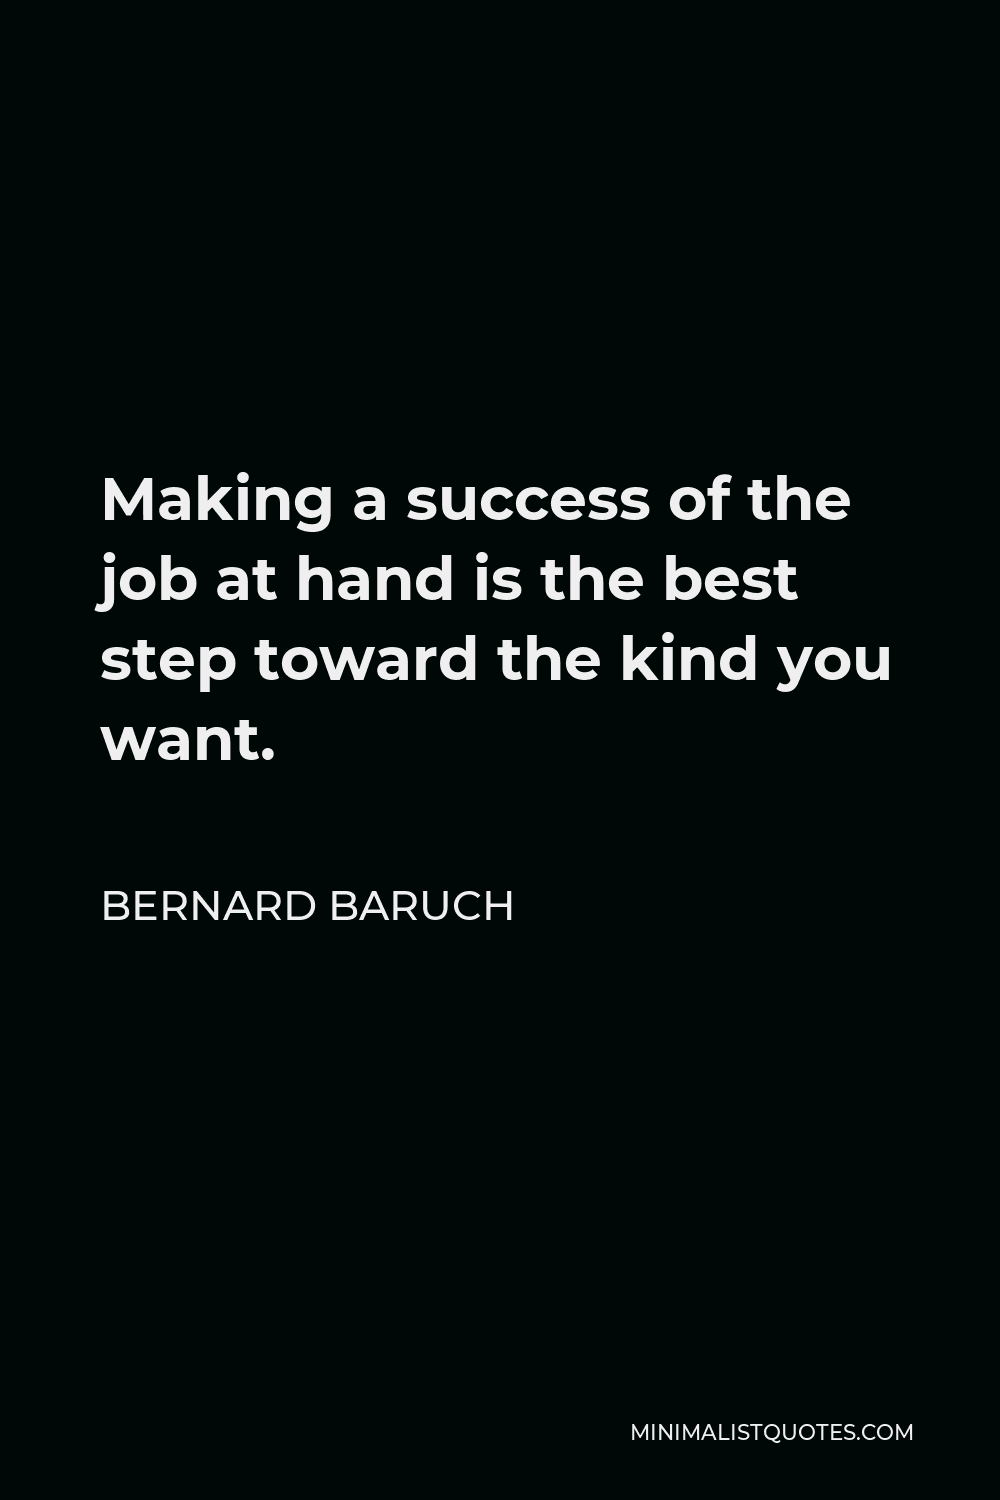 Bernard Baruch Quote - Making a success of the job at hand is the best step toward the kind you want.